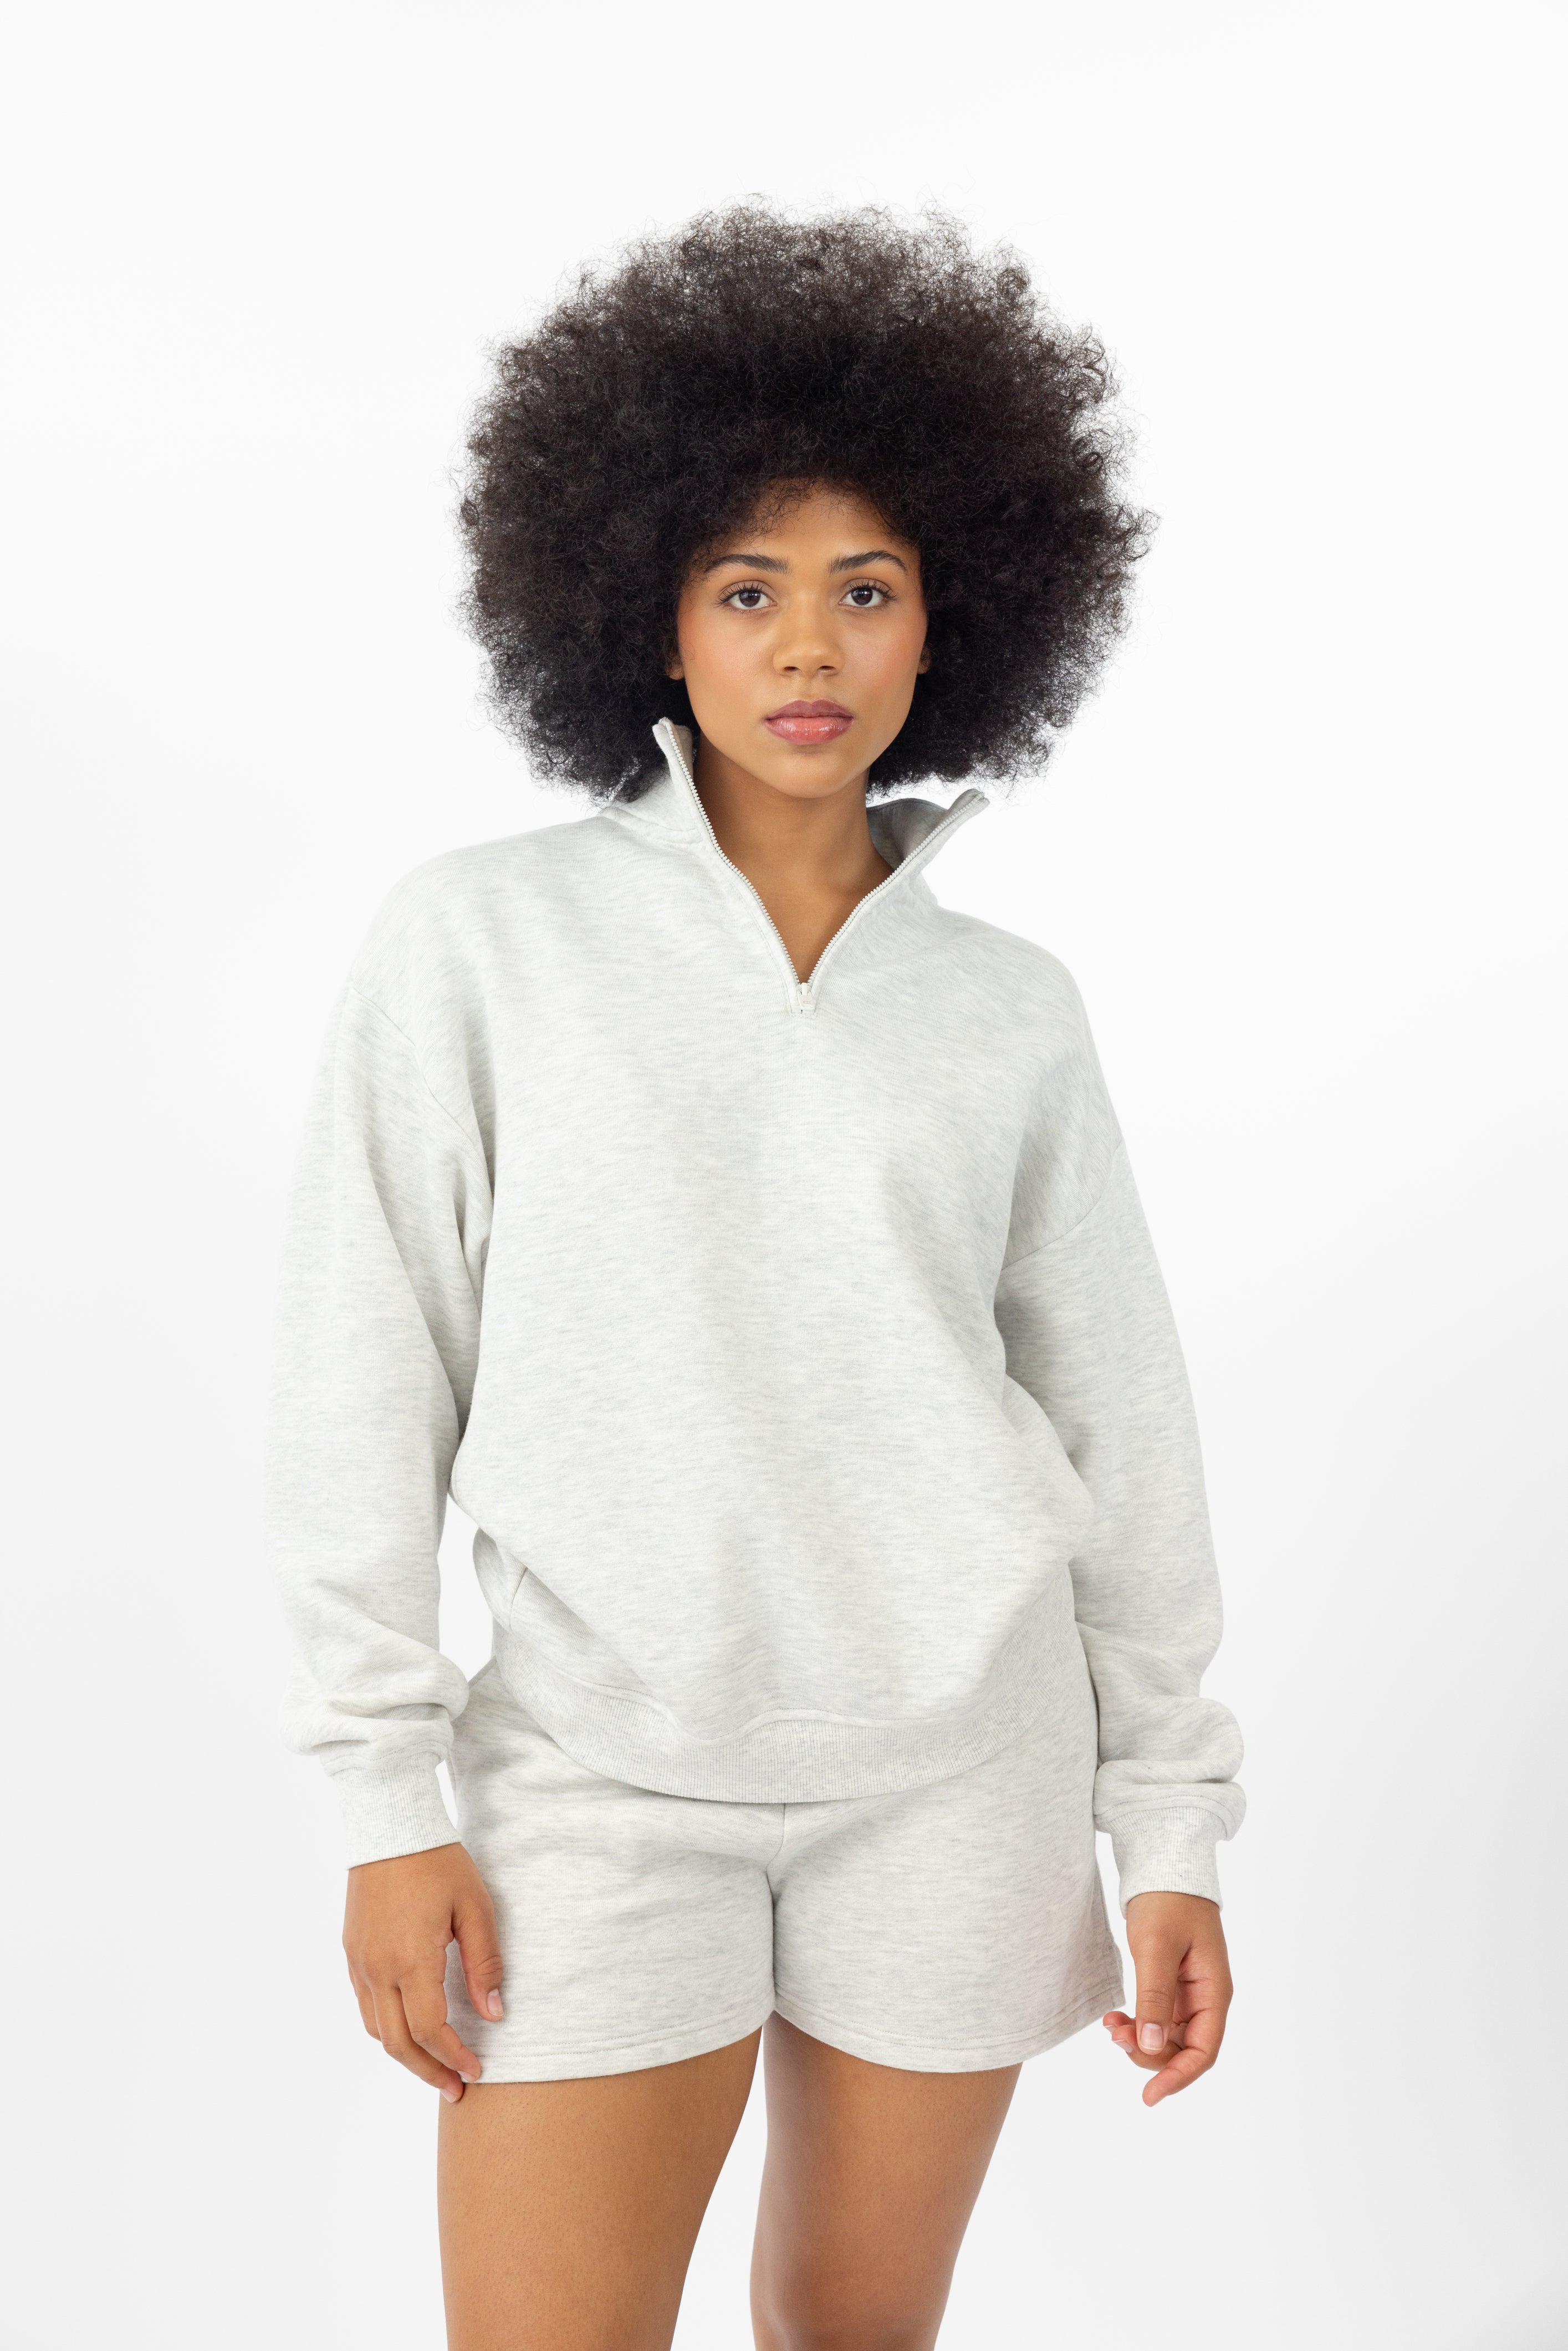 Heather Grey CityScape Quarter Zip. The quarter zip is being worn by a female model. The model is wearing accompanying CityScape clothing to complete the look of the quarter zip. The photo was taken with a white background. |Color:Heather Grey